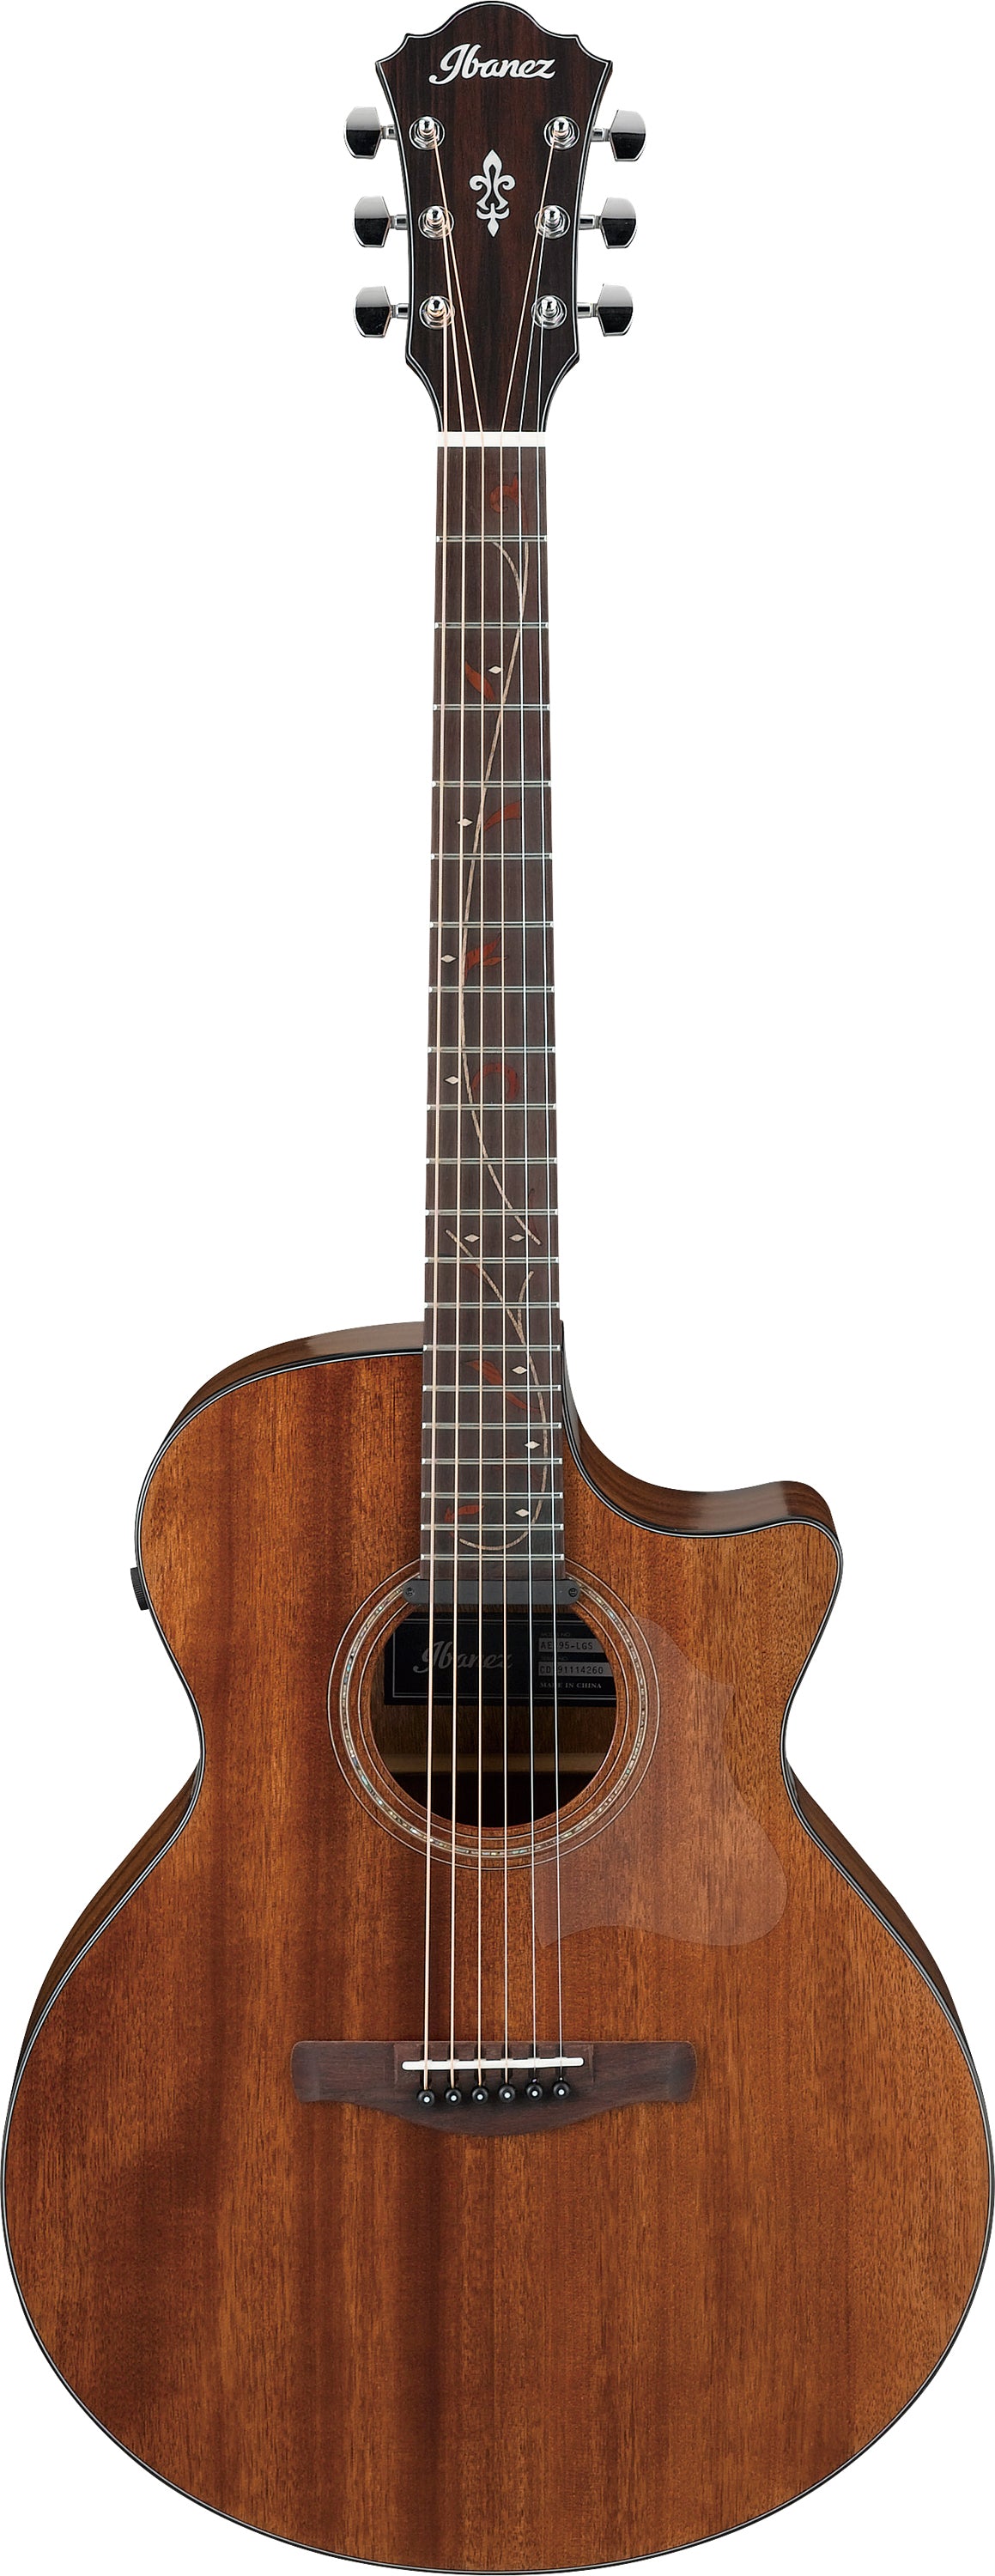 Ibanez AE295 Acoustic Guitar - Natural Low Gloss木結他